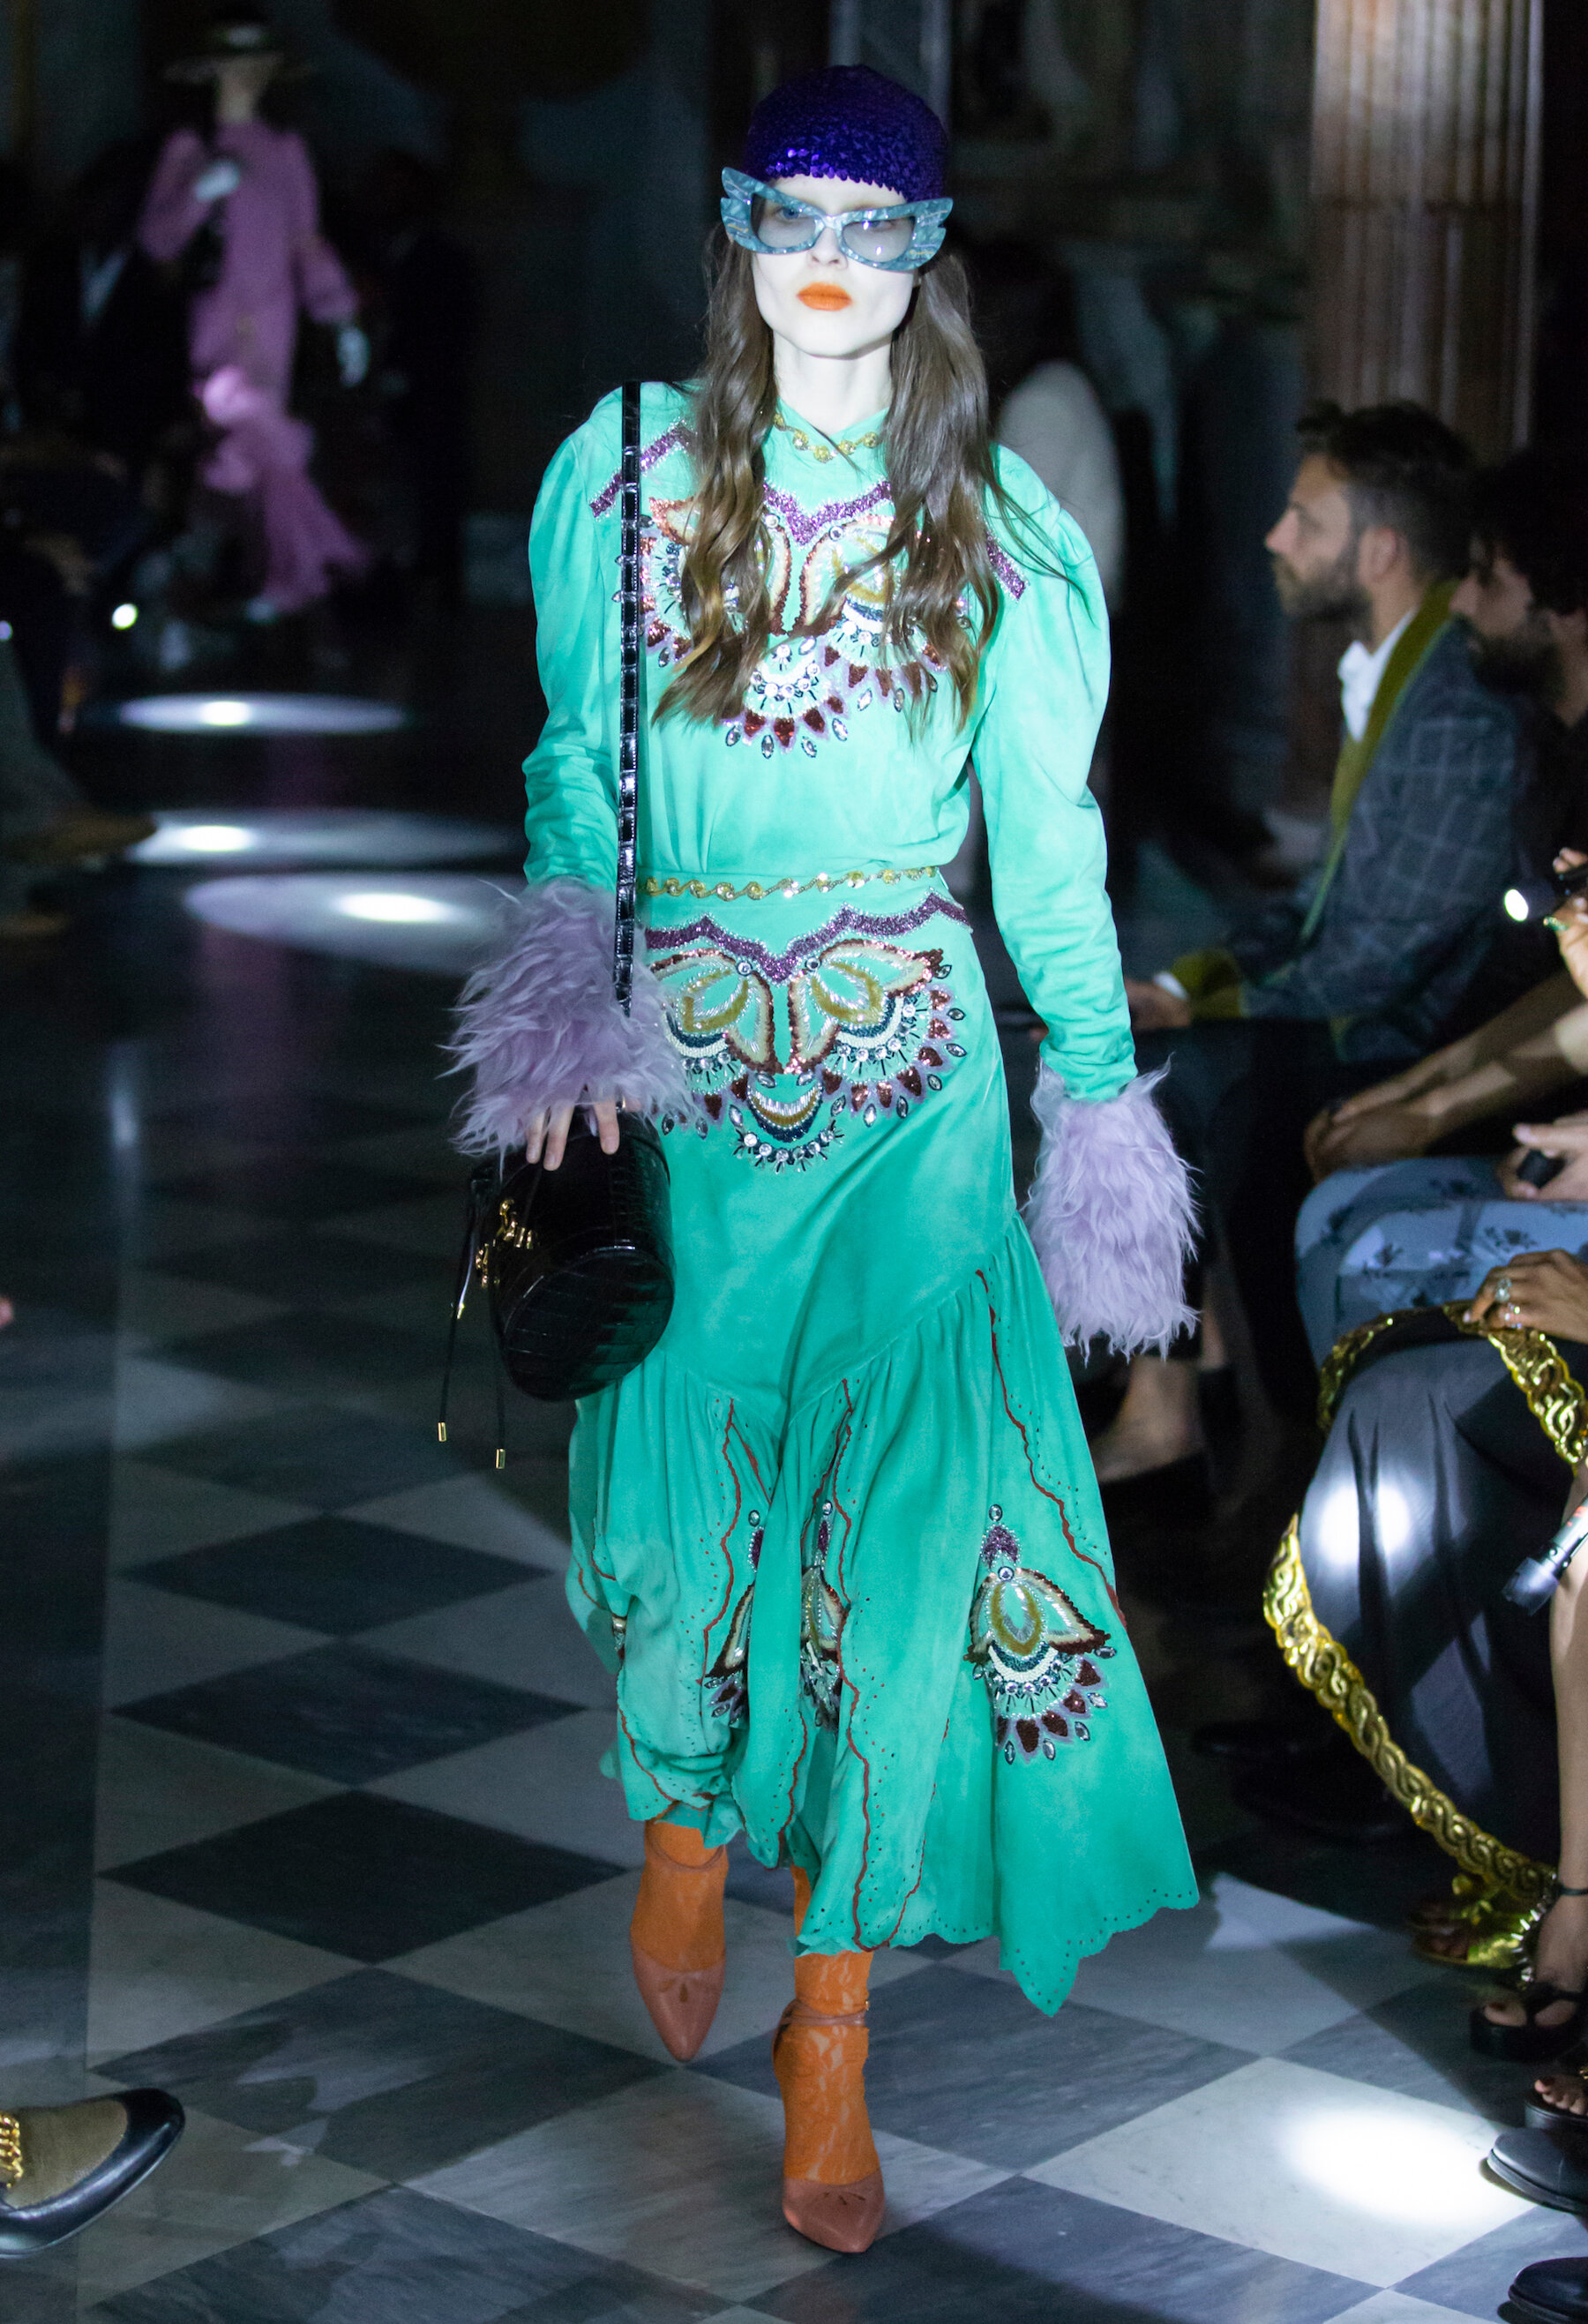 Gucci Cruise 2020 Collection (Look 65).jpg